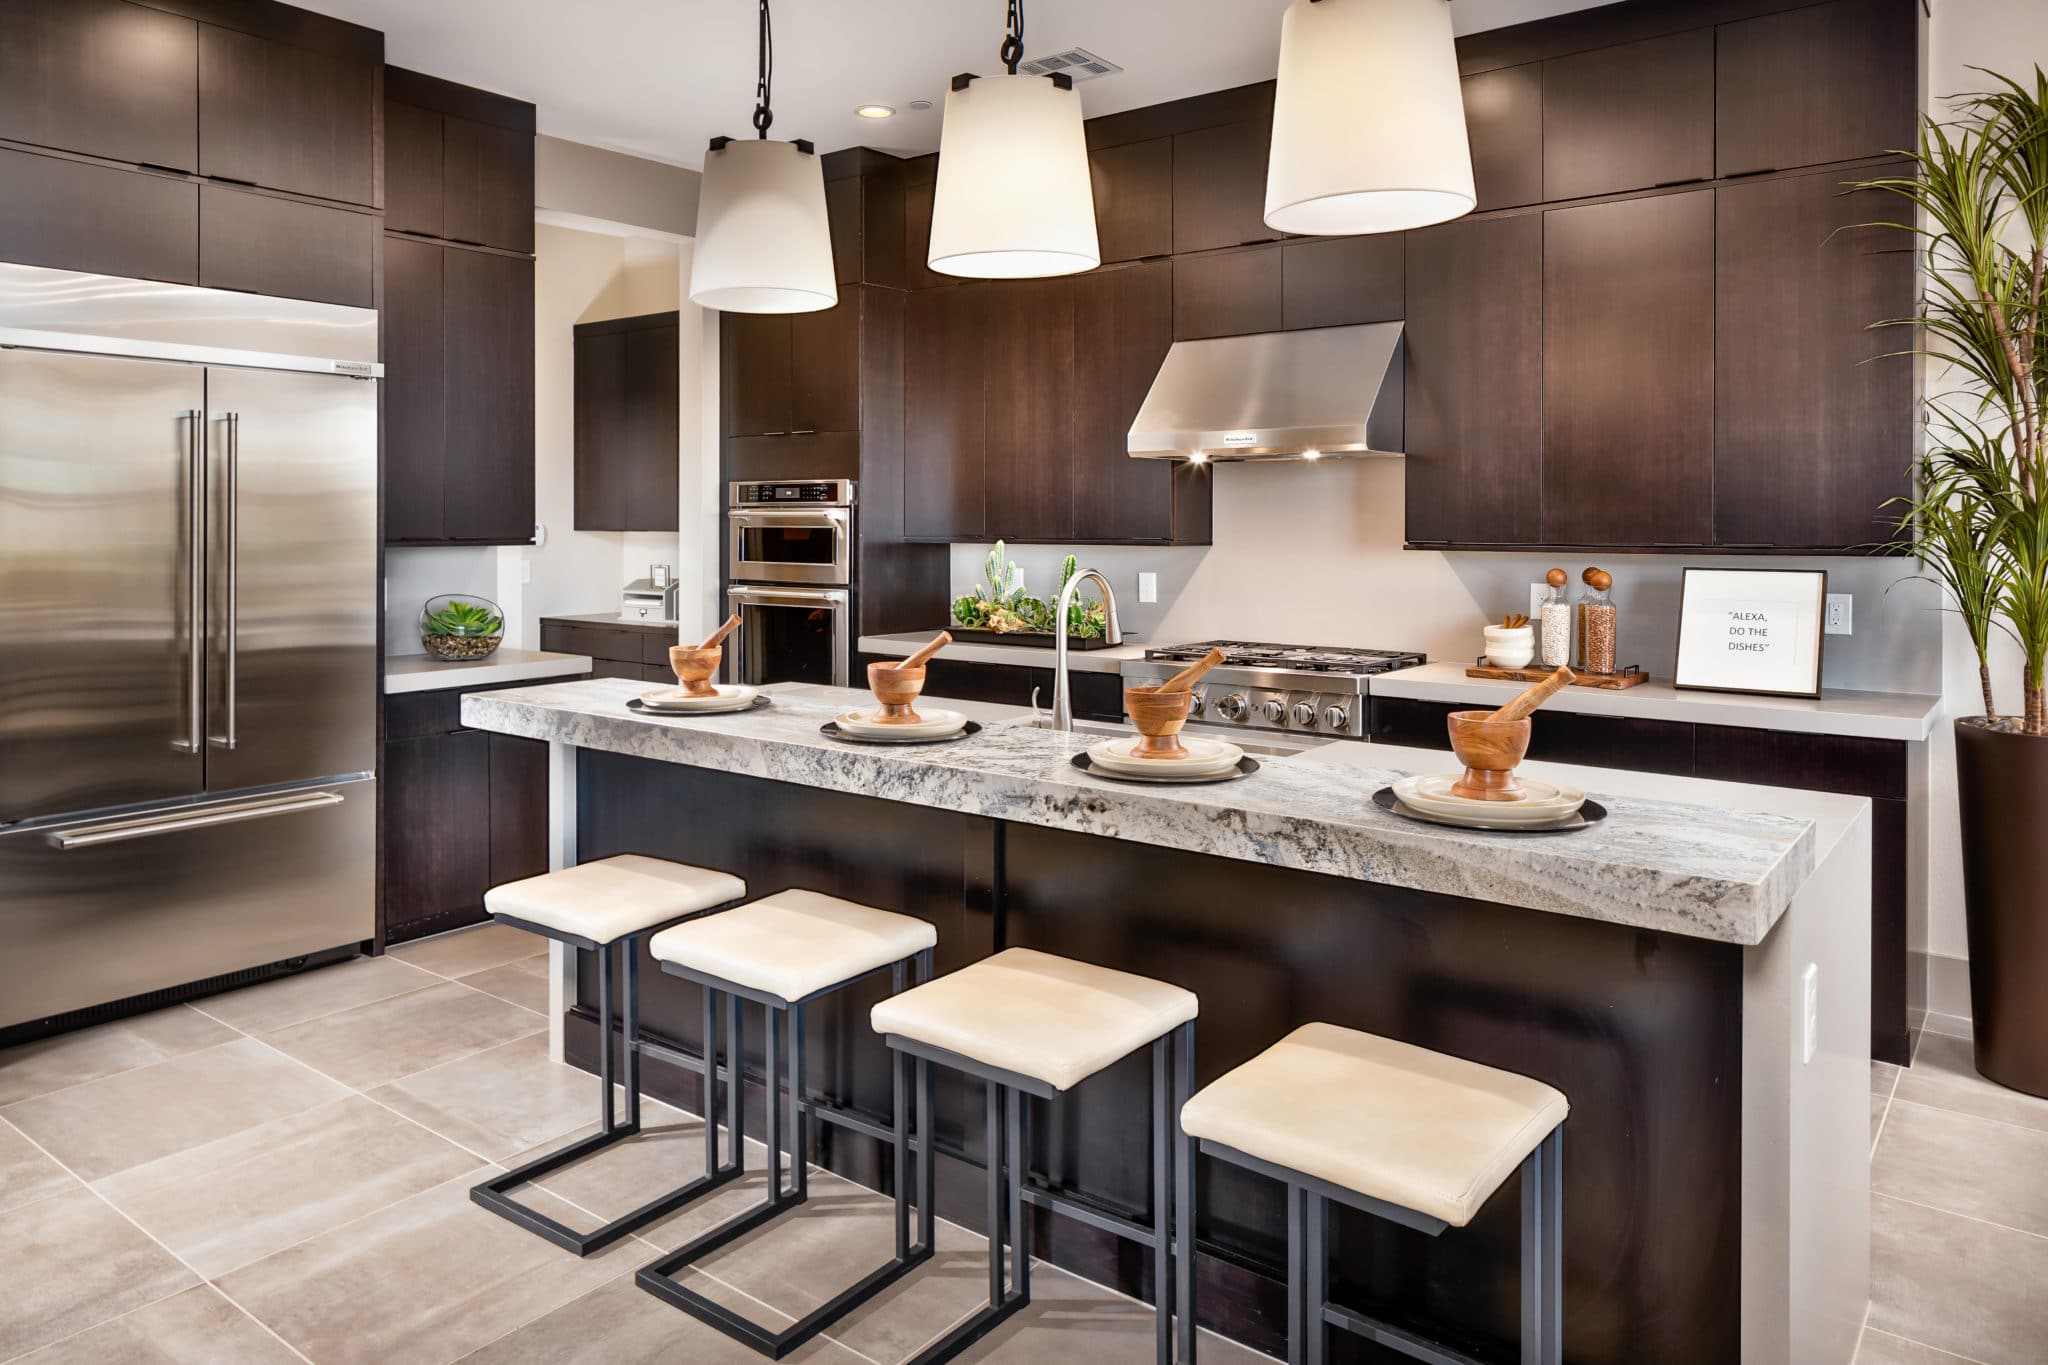 Kitchen of Estella Model at Acadia Ridge by Toll Brothers